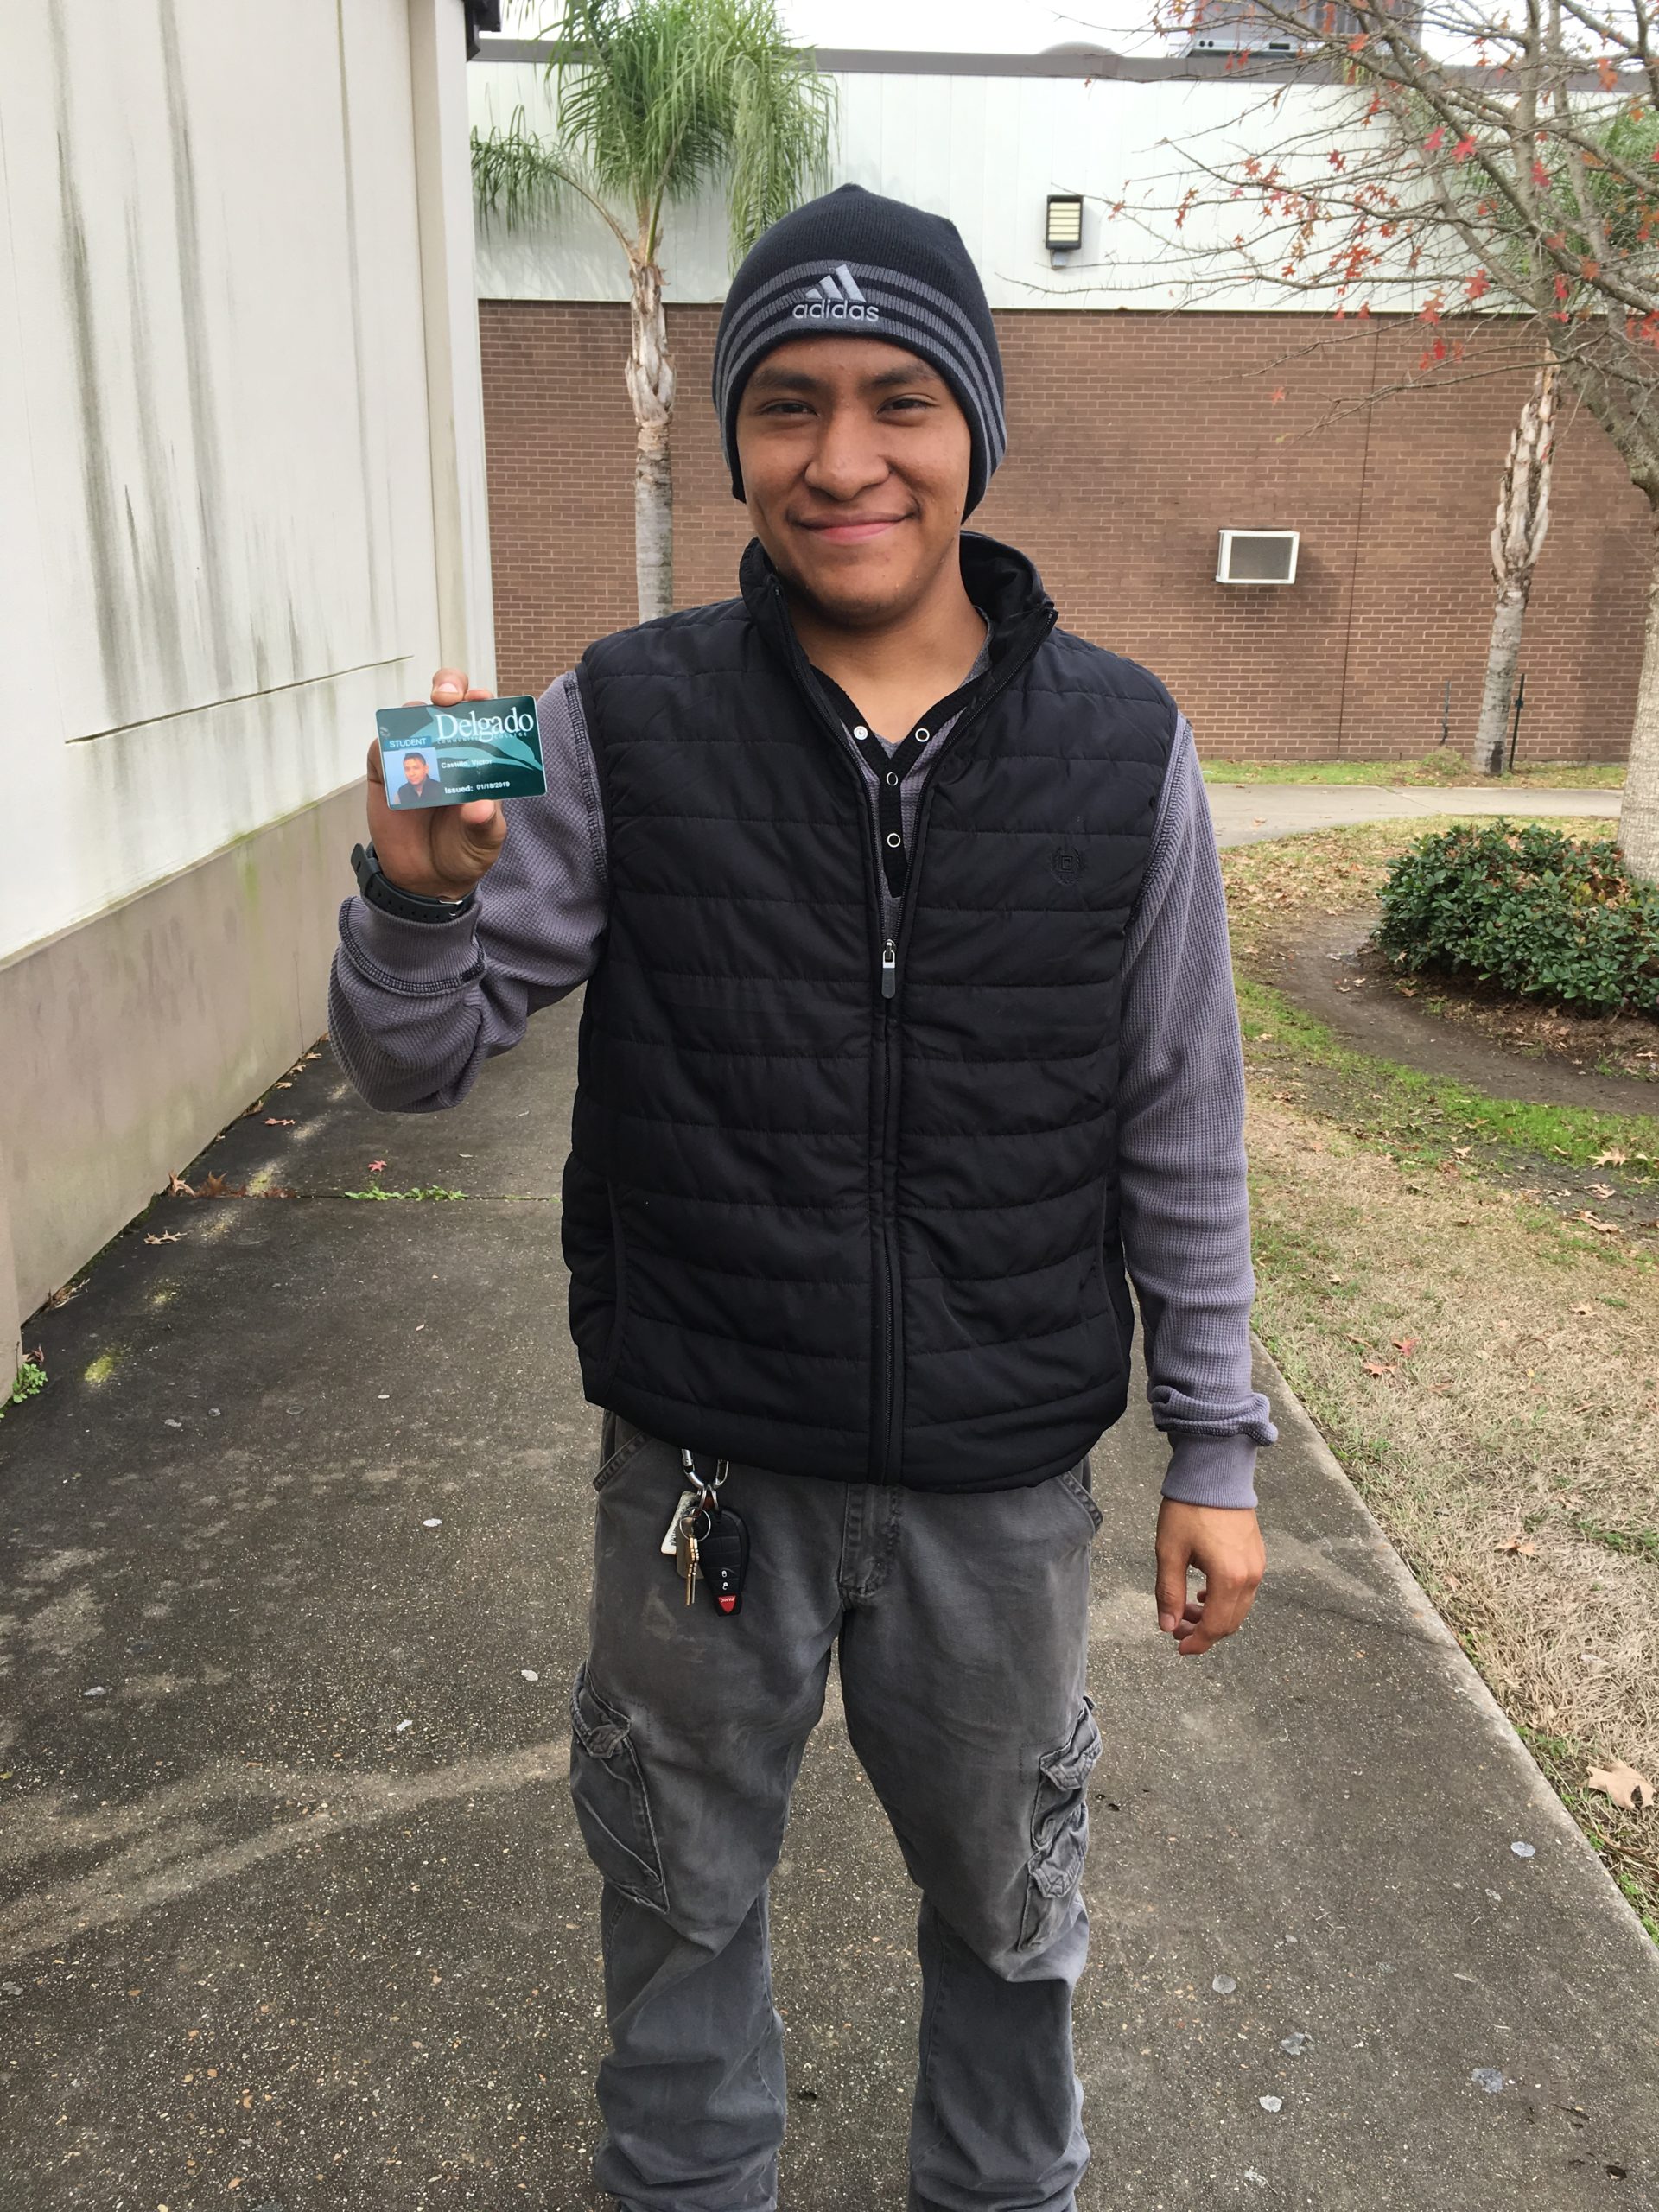 Victor Castillo smiling with his student ID badge for Delgado Community College.